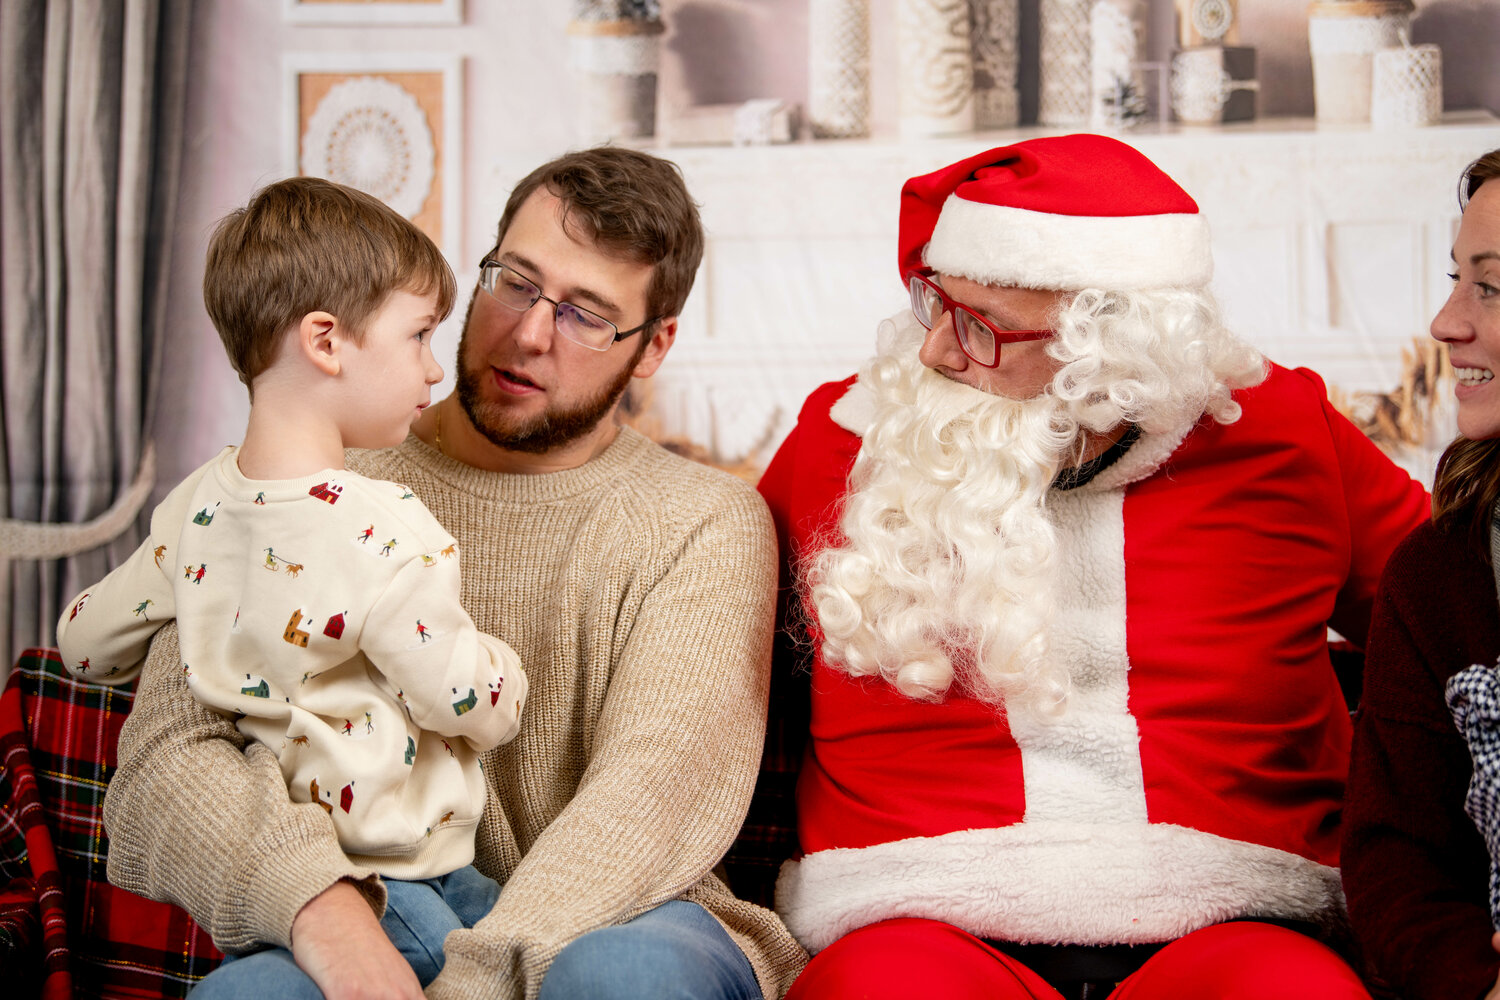 Right: Austin Brandt tells Santa what he wants for Christmas while sitting on dad TJ’s lap.